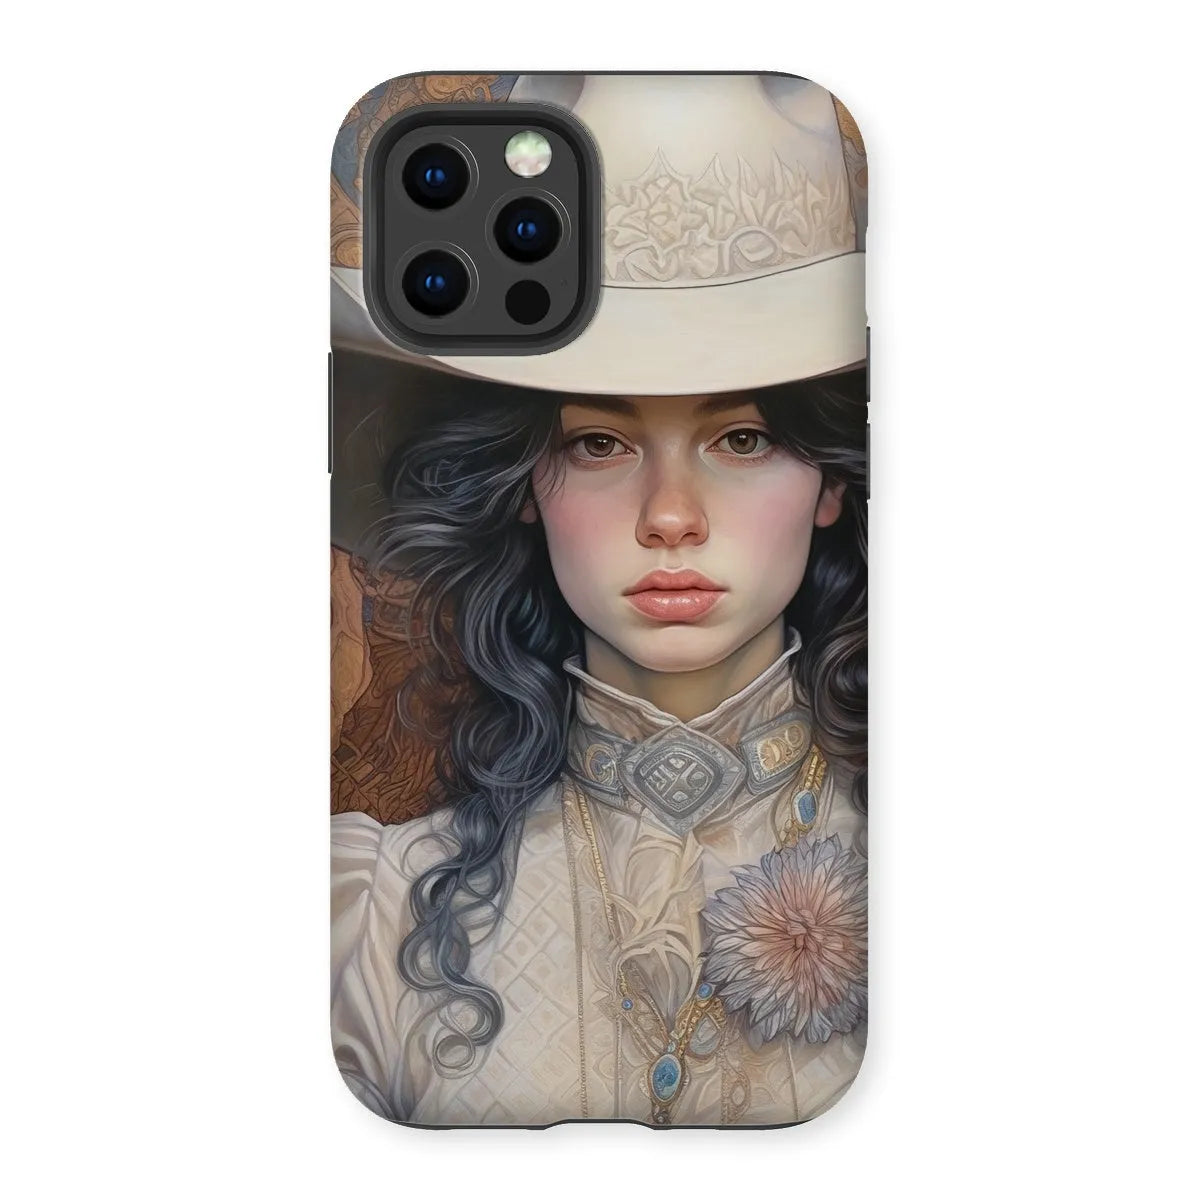 Helena The Lesbian Cowgirl - Sapphic Art Phone Case - Iphone 12 Pro / Matte - Mobile Phone Cases - Aesthetic Art